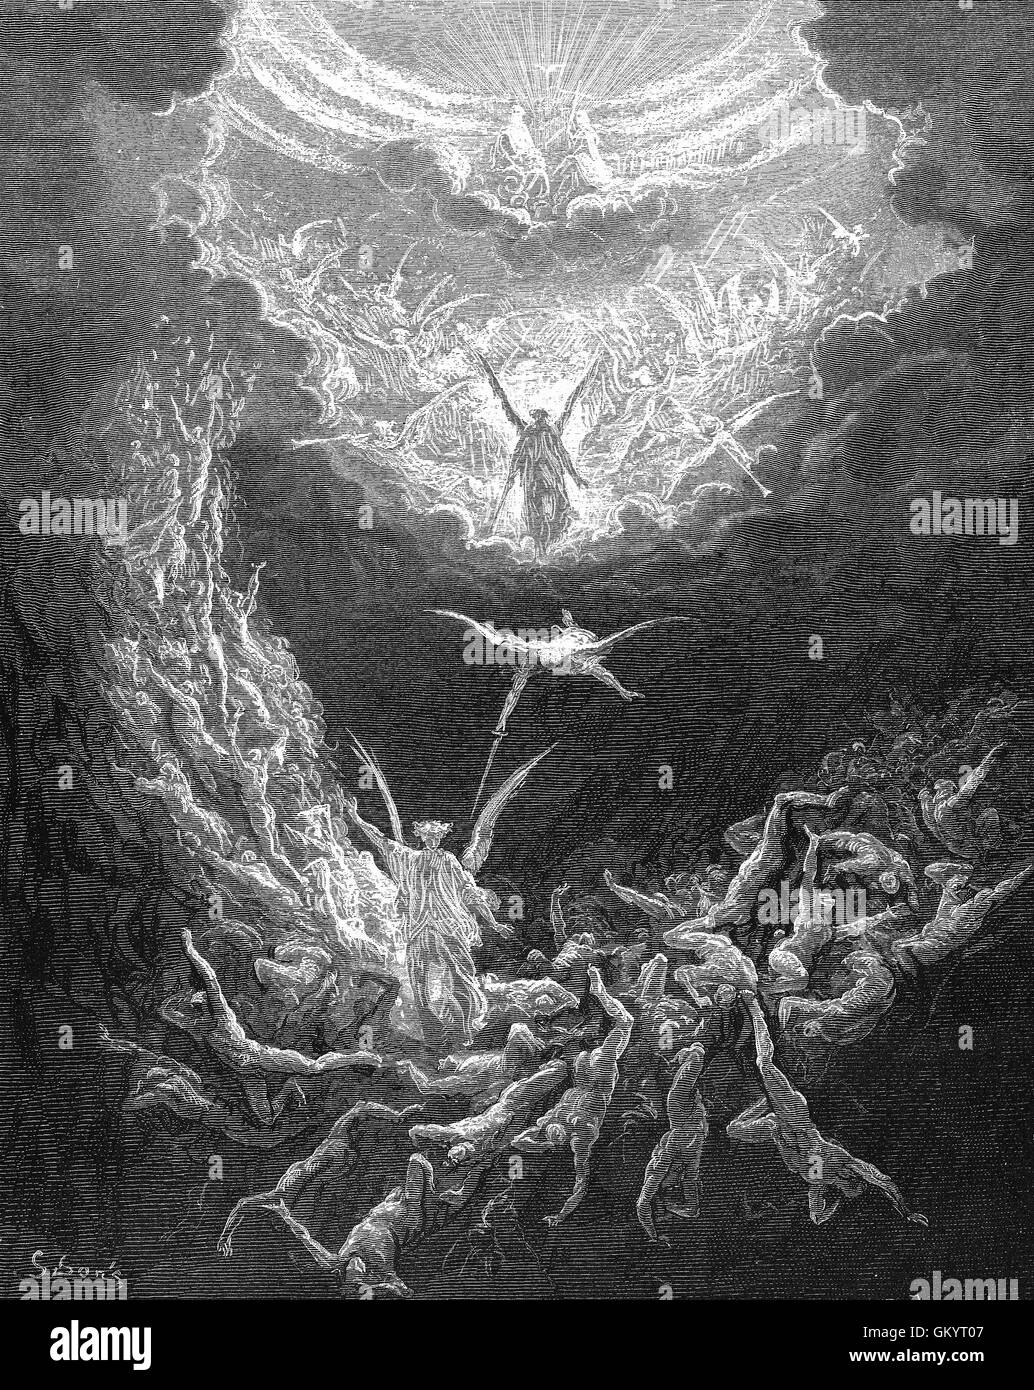 Engraving of The Last Judgement by Gustave Doré Stock Photo